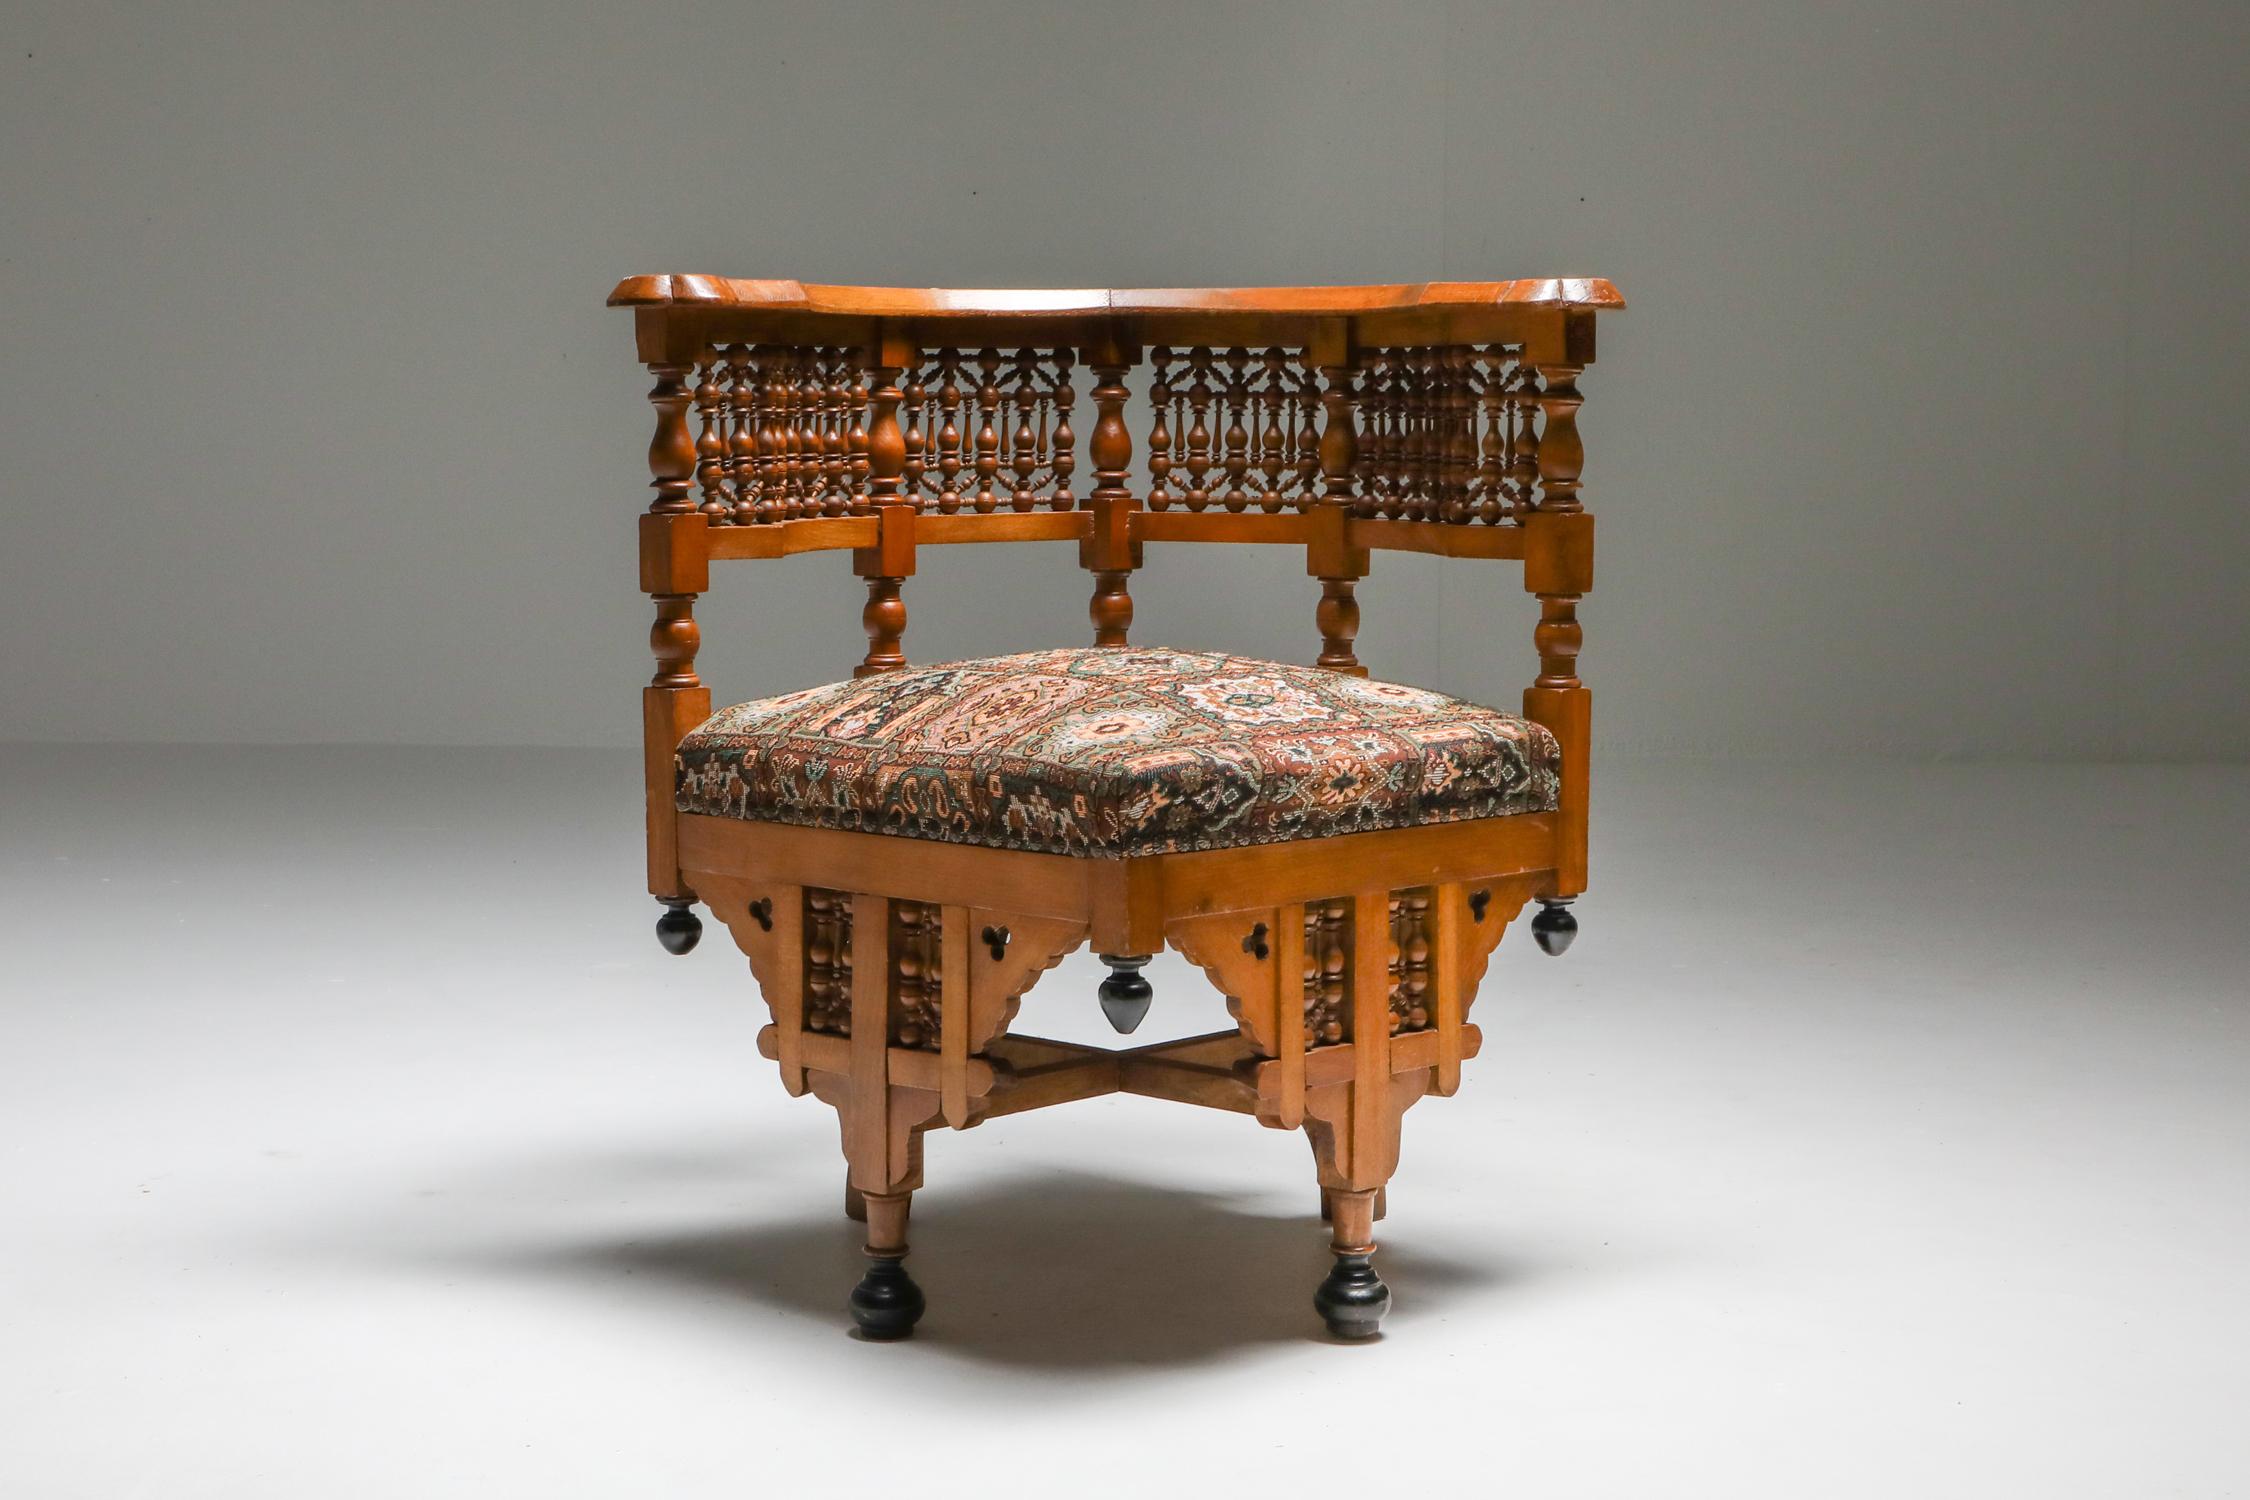 Carlo Bugatti; Art Nouveau; chair; side chair; armchair; lounge chair; carvings; wood; Moorish; Syrian; 1950s; Design; Syria; Asia; Moroccan Fretwork; Celluloid Inlay;

Moorish Syrian armchair, intricate Moroccan fretwork on the back and side,